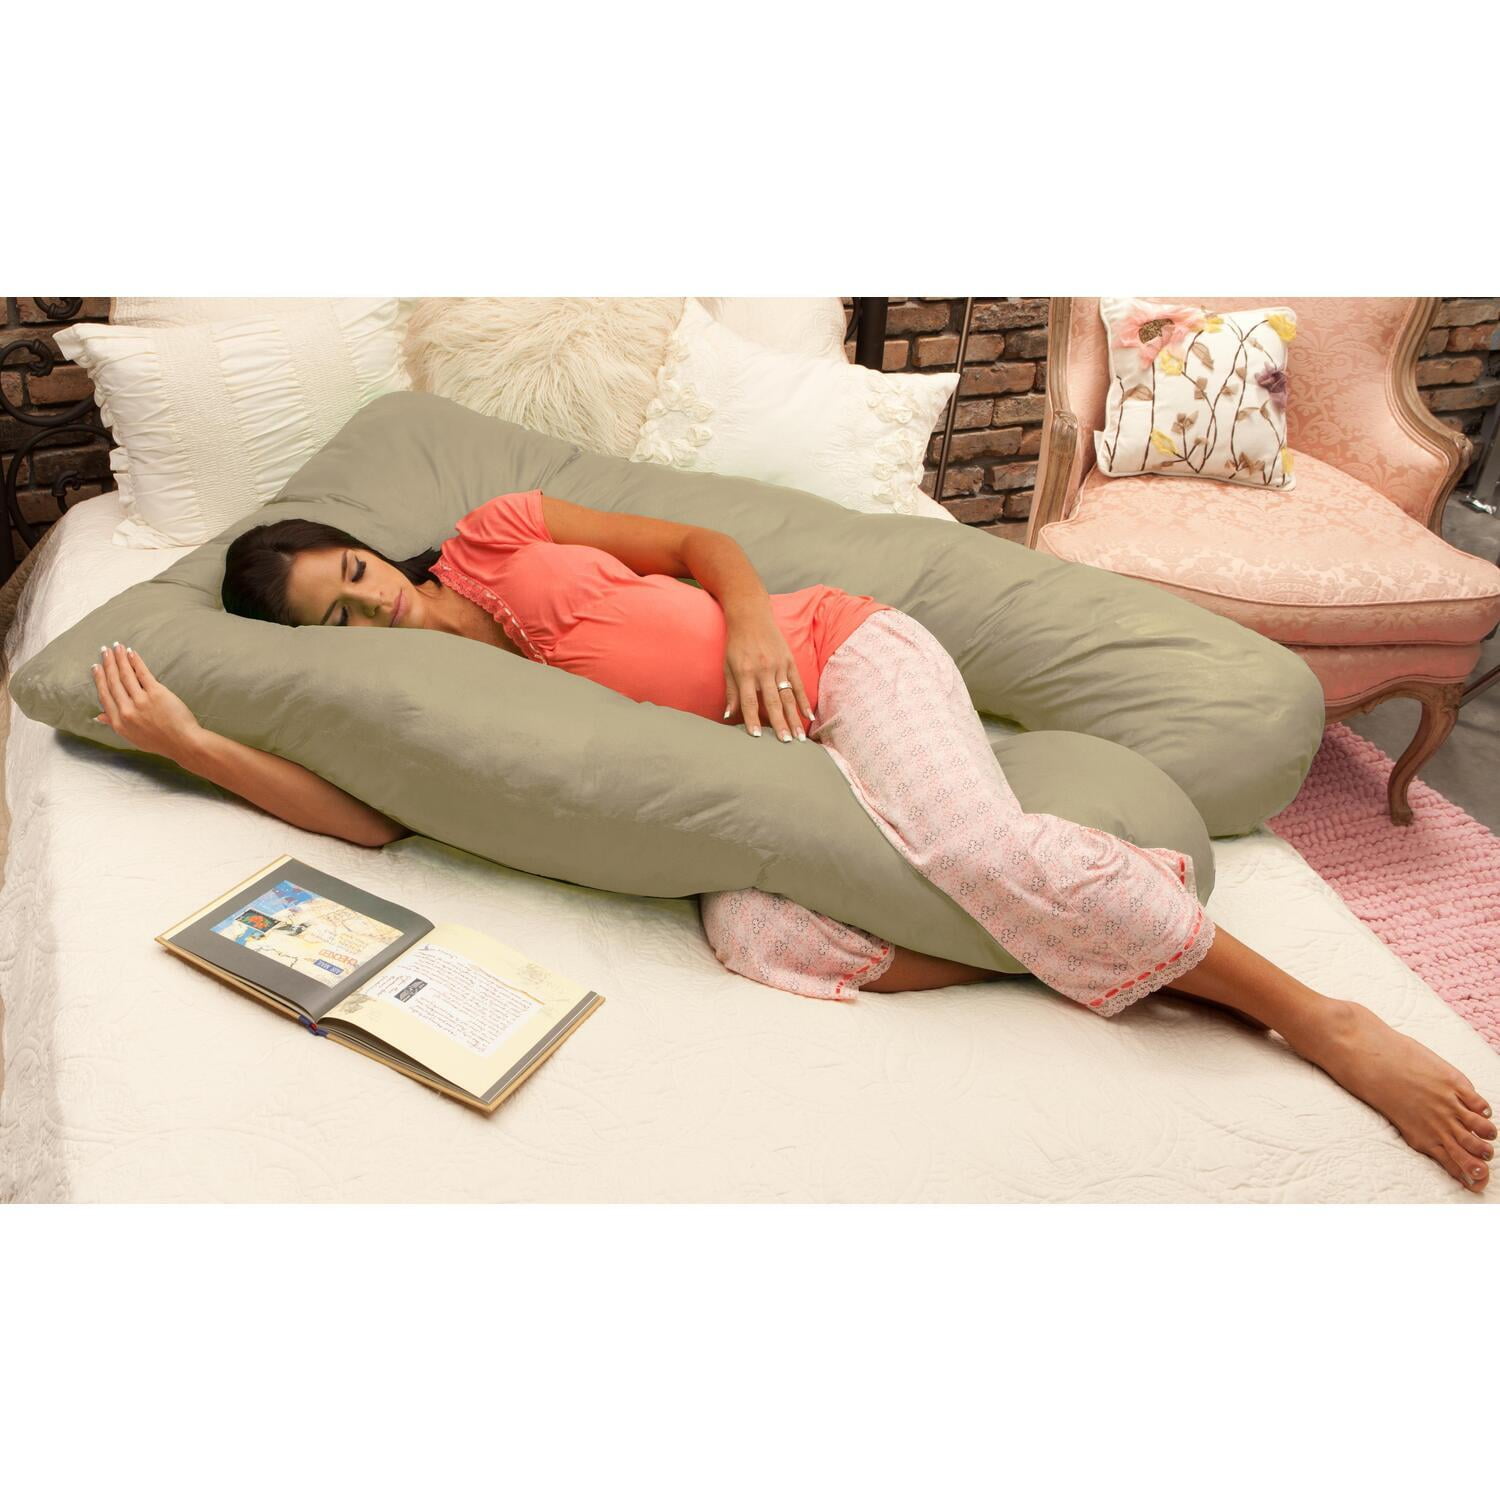 A Body Pillow Is Essential for Pregnant Sleep - Mom365